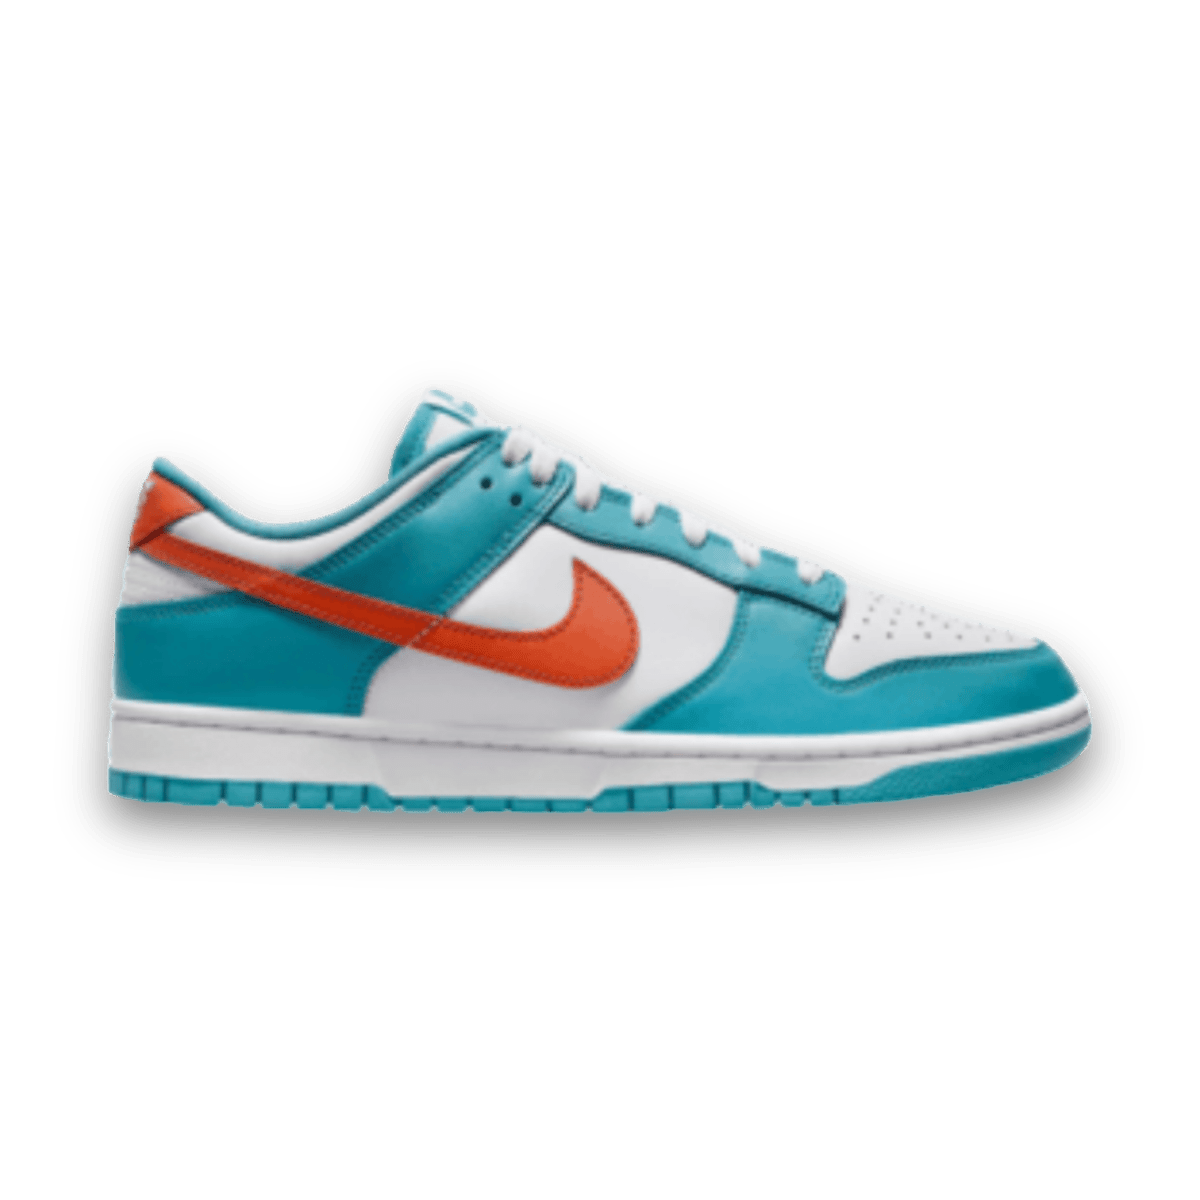 Dunk Low Miami Dolphins Orange & Teal - Low Sneaker - Dunks - Jawns on Fire - sneakers